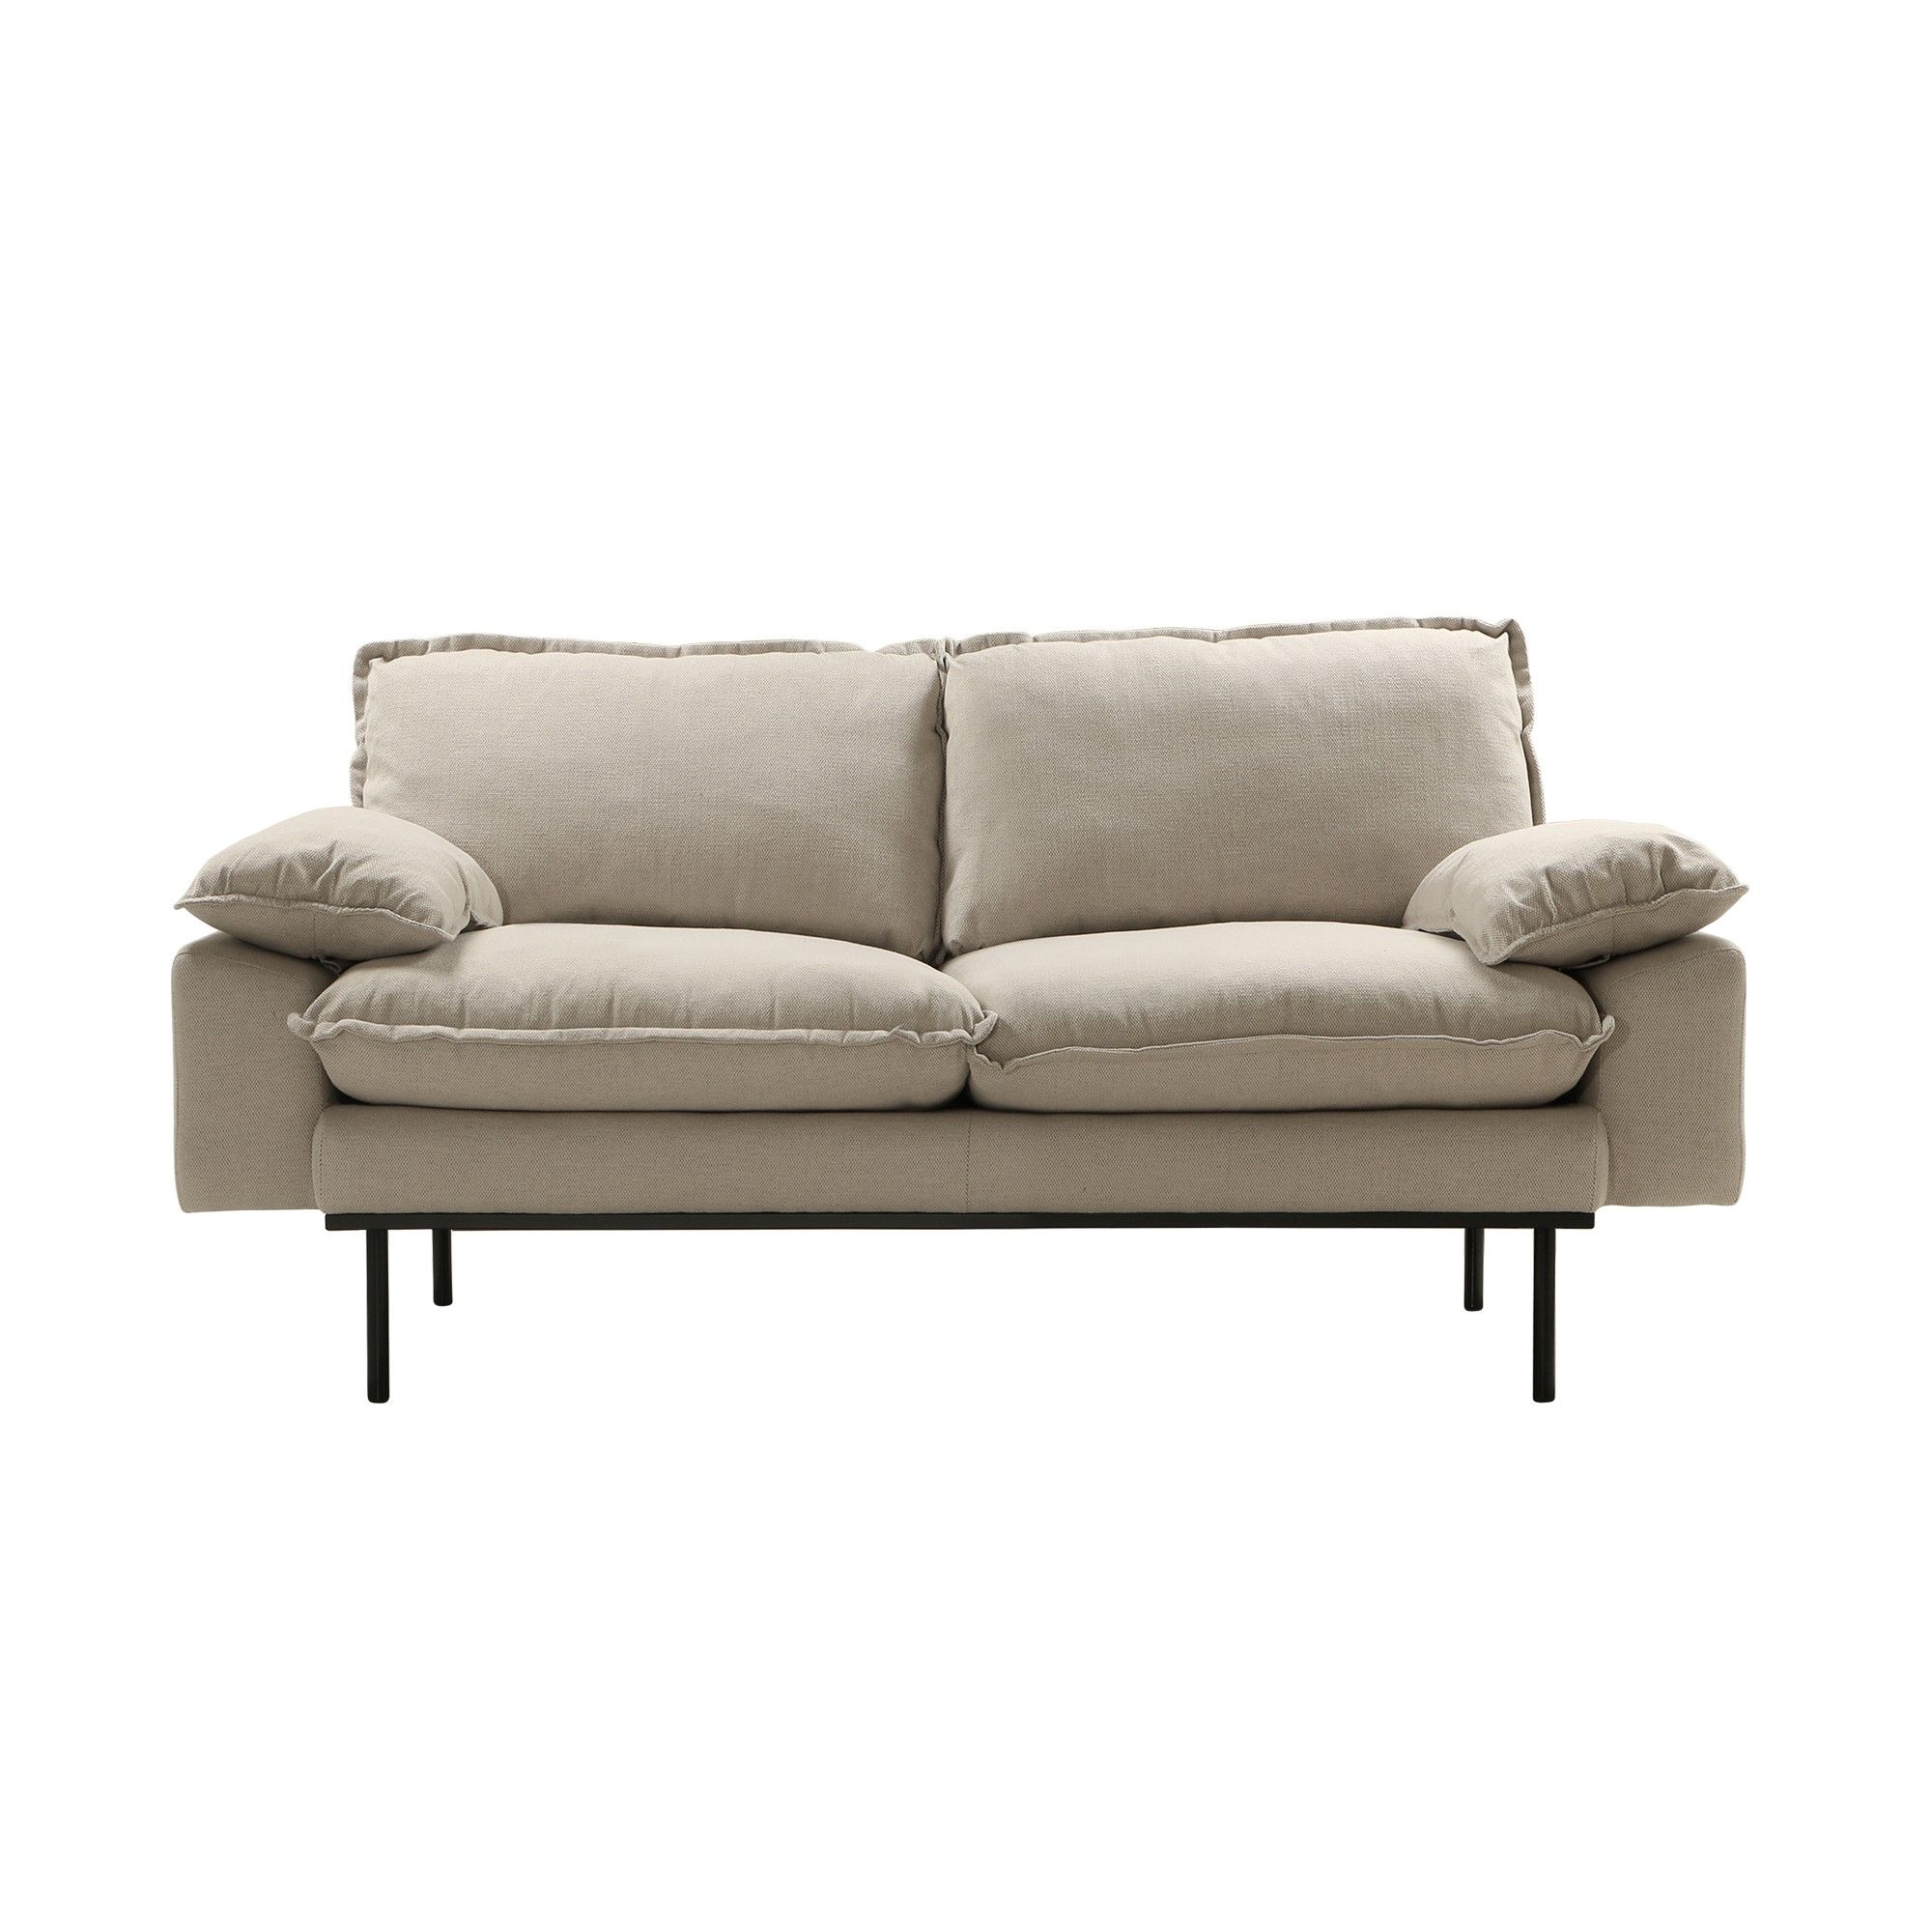 Retro 2 Seater Sofa – Beige – Hk Living Pertaining To Sofas In Beige (View 4 of 15)